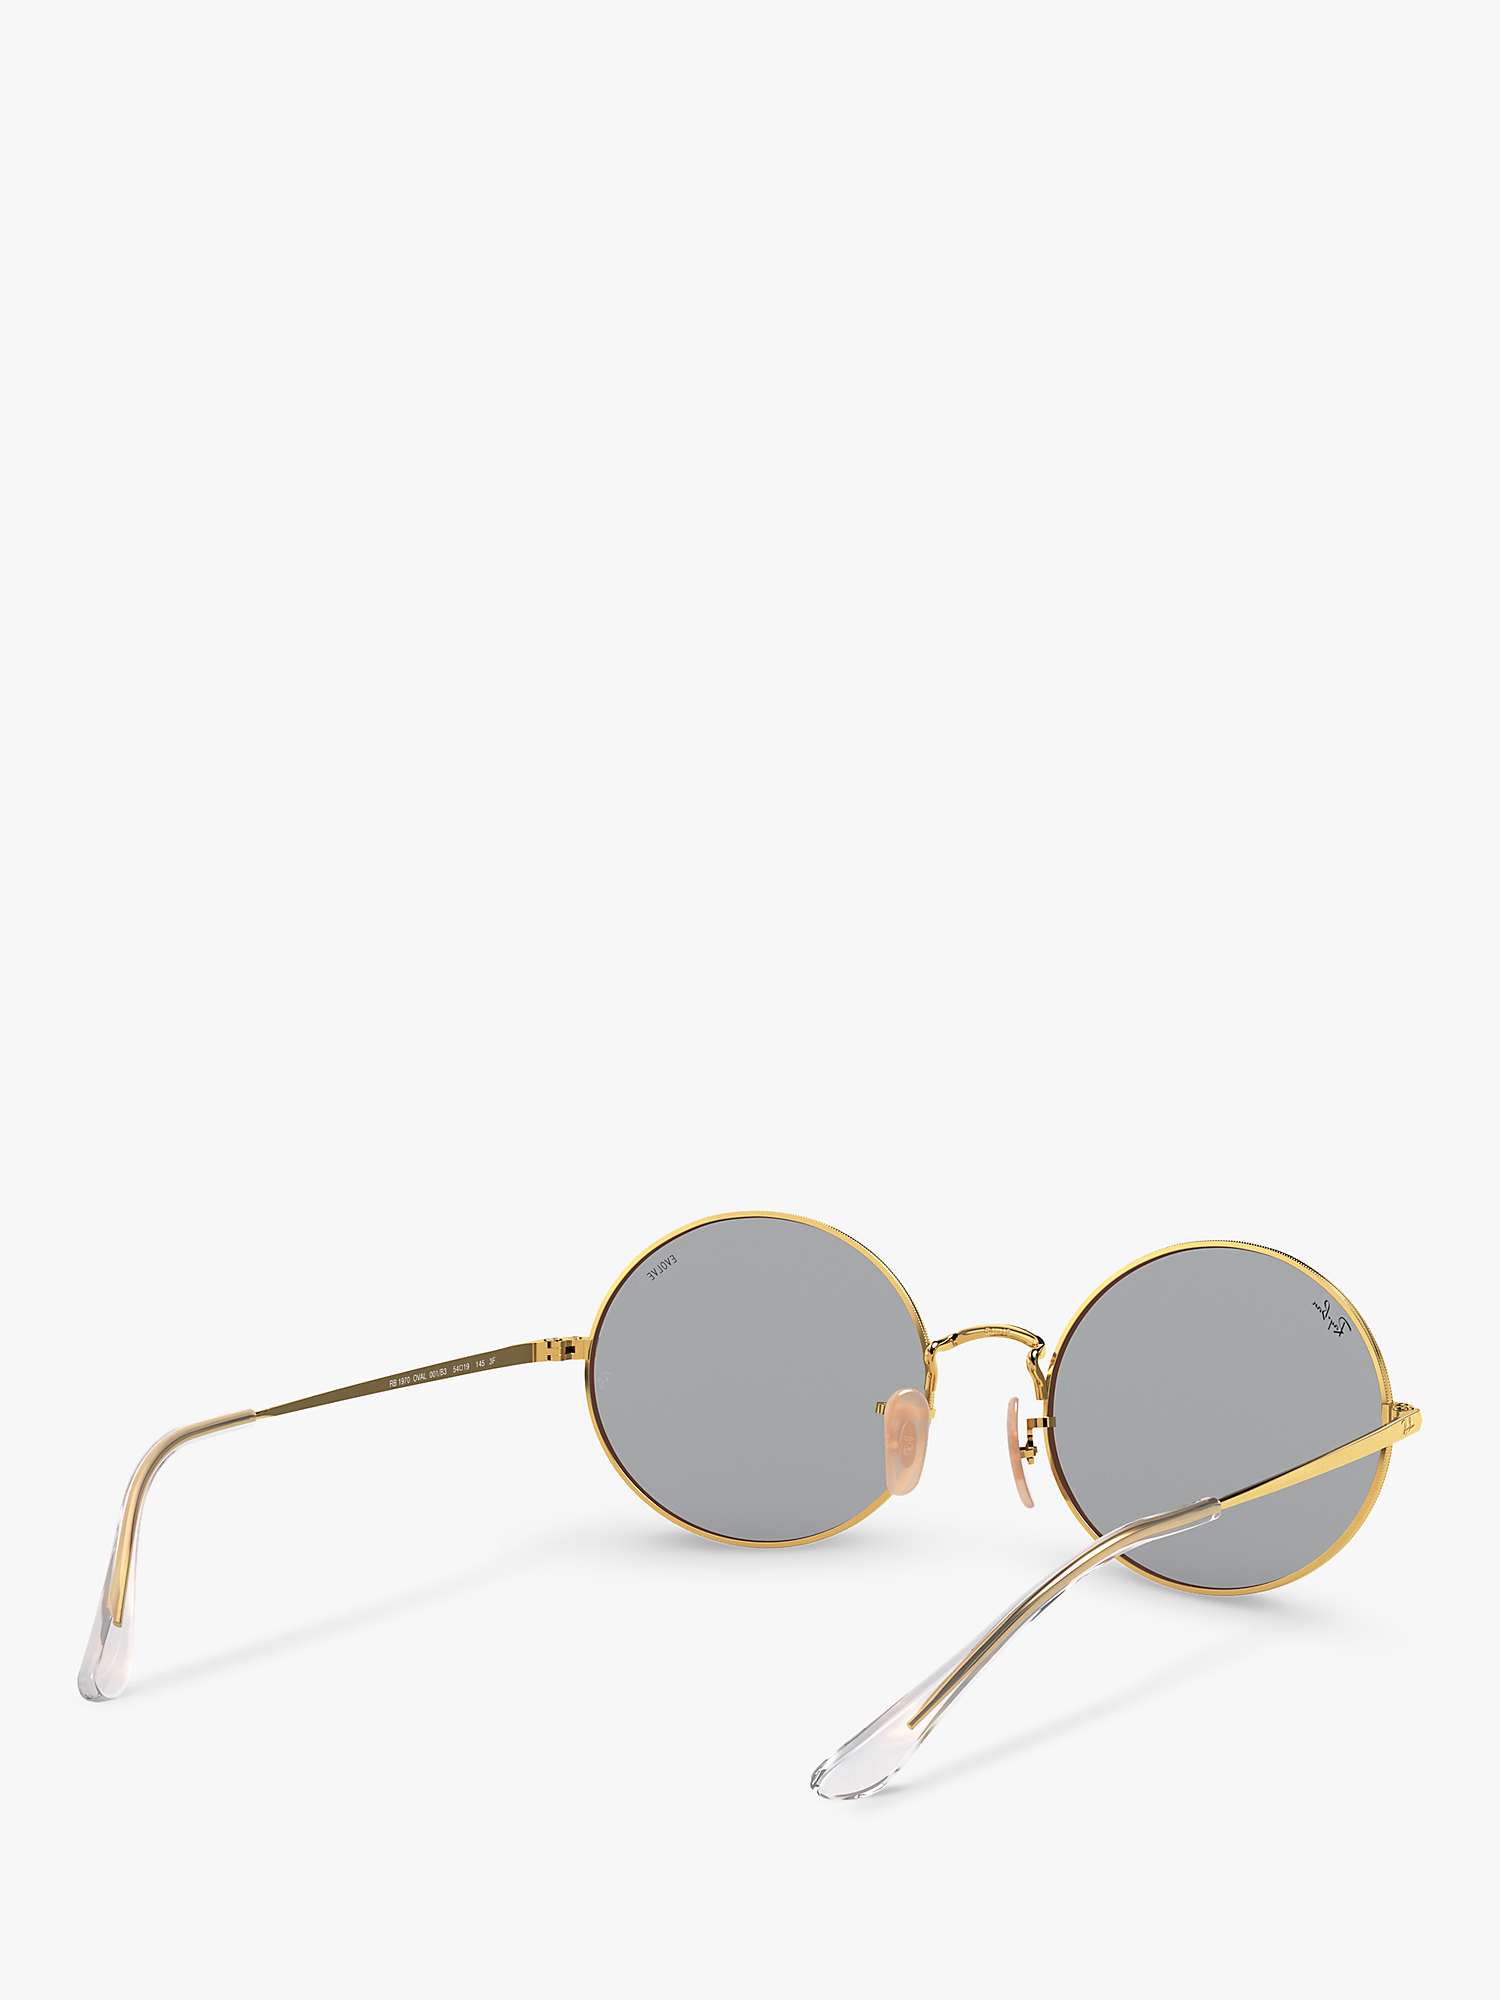 Ray-Ban RB1970 Unisex Oval Sunglasses, Arista/Grey at John Lewis & Partners